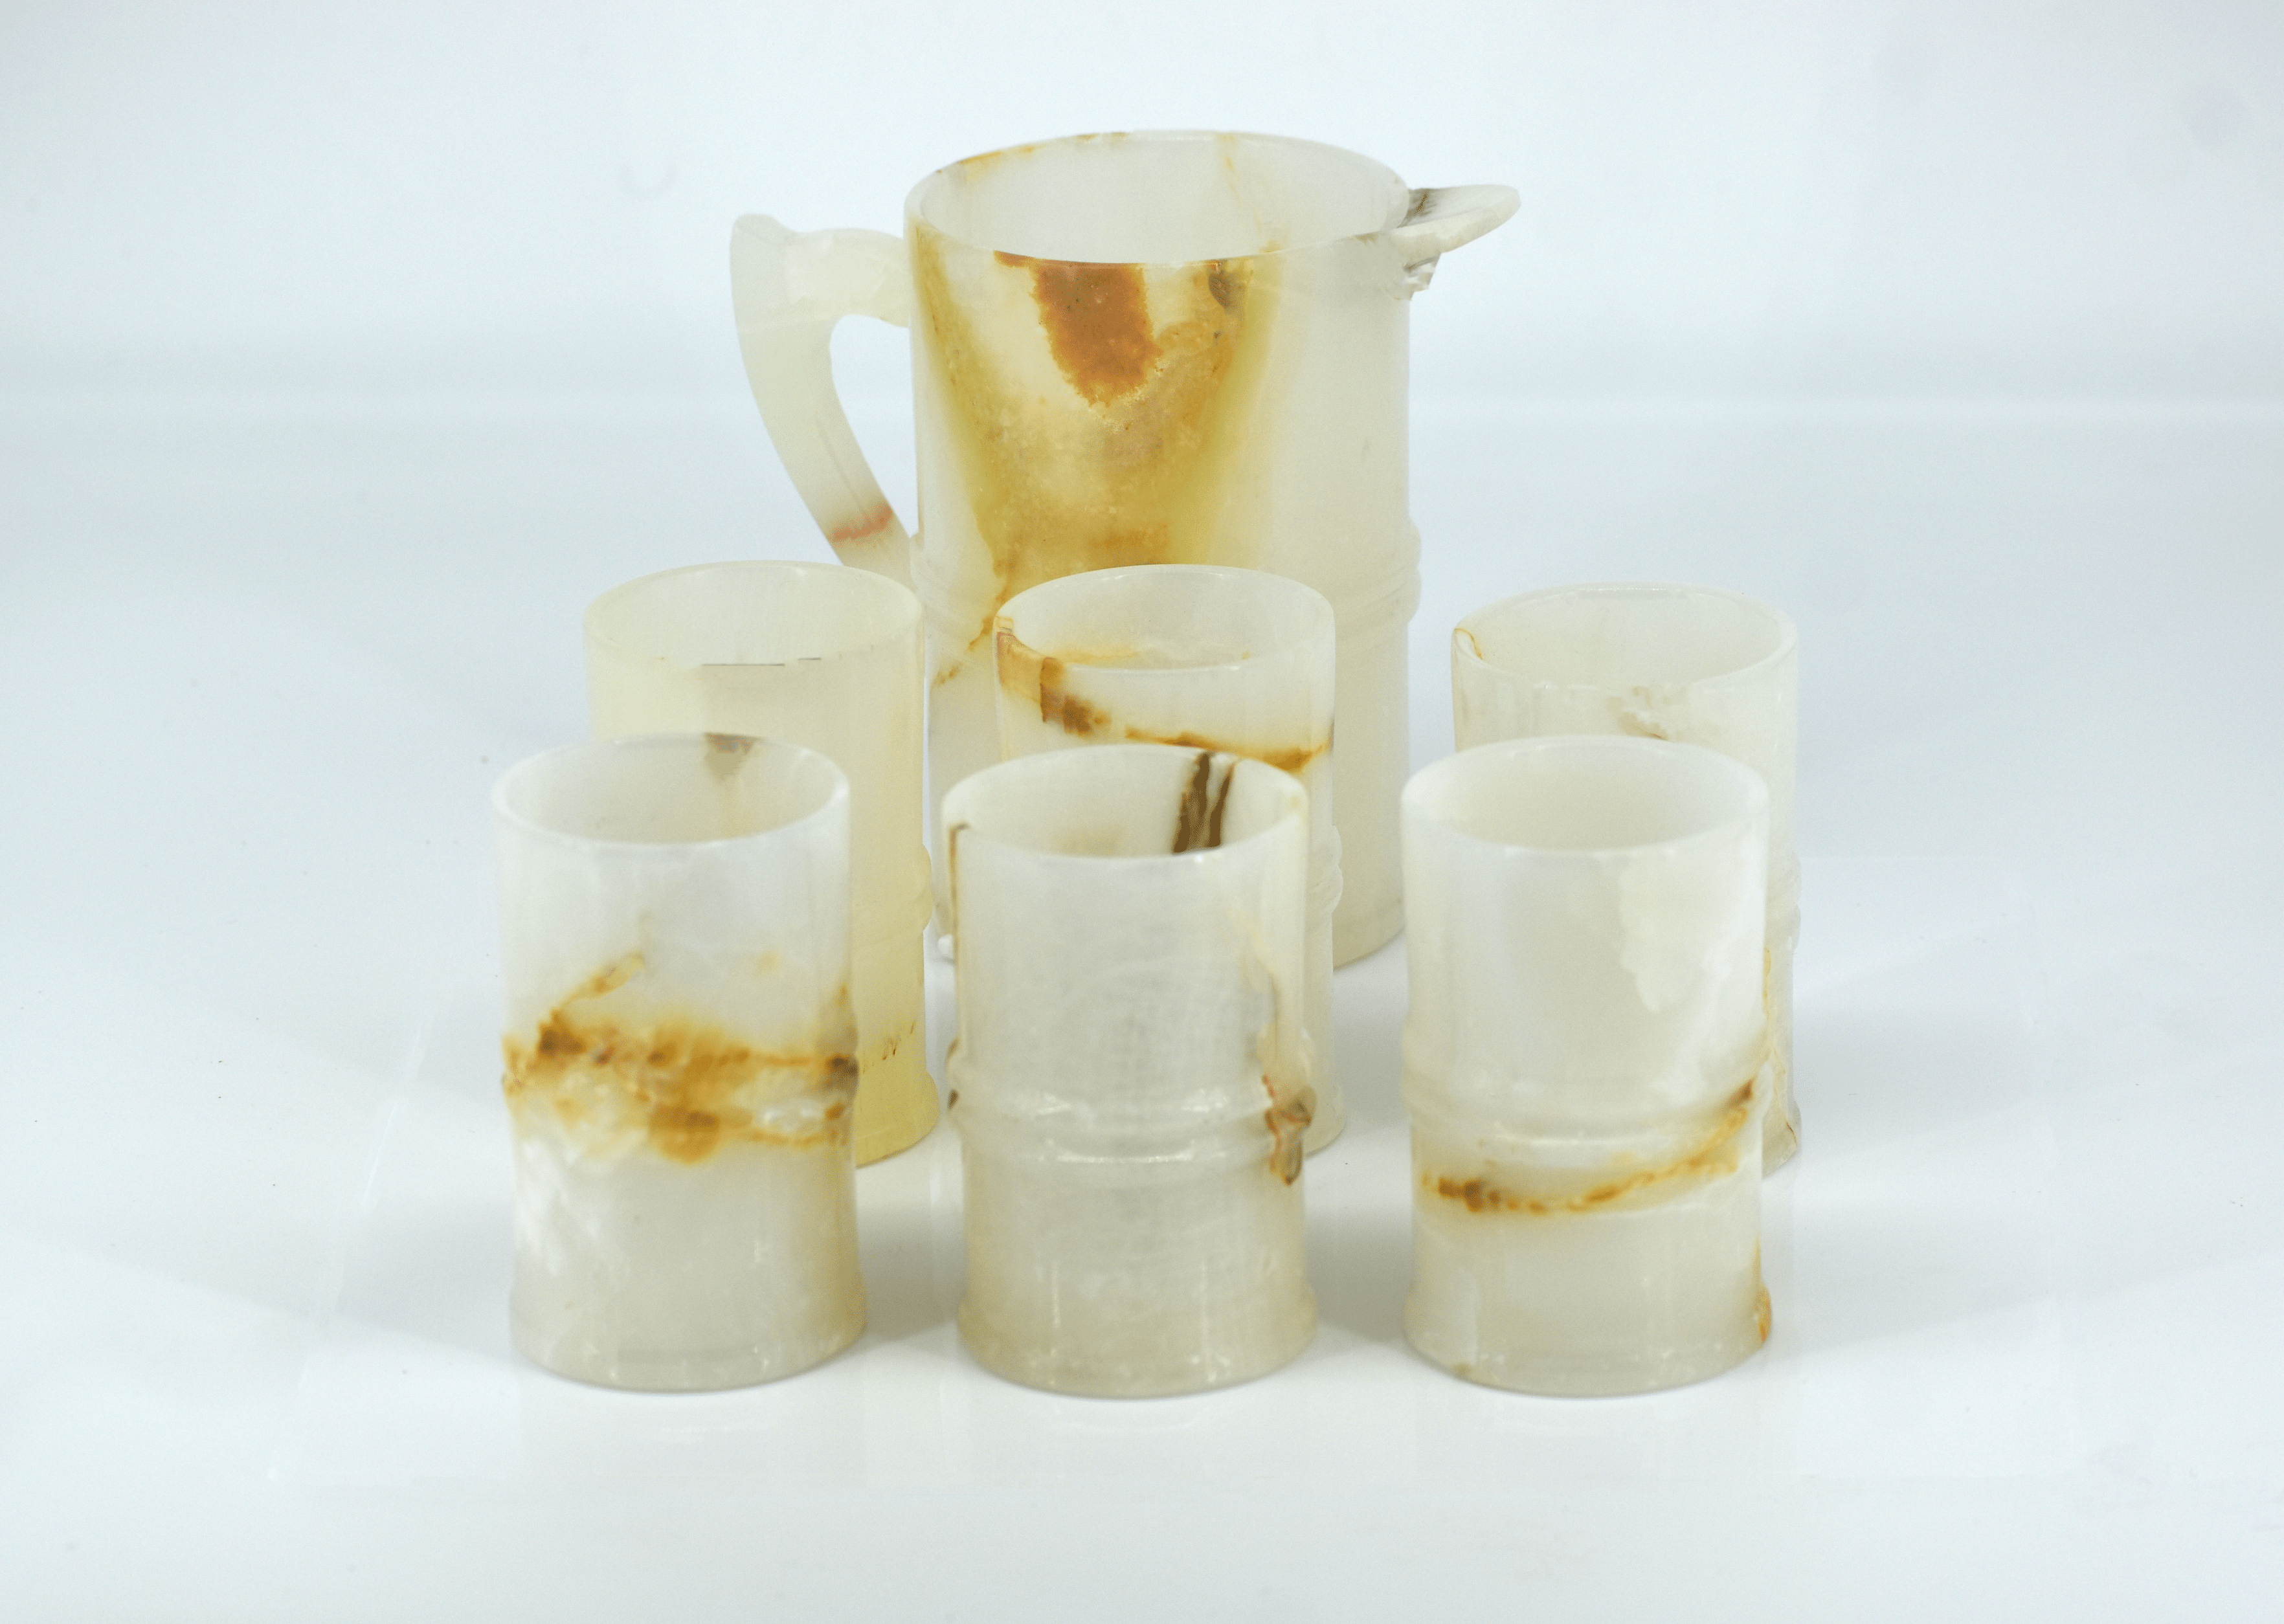 Onyx Marble 7 piece water Set with 1 pitcher and 6 glasses - 11 Inches